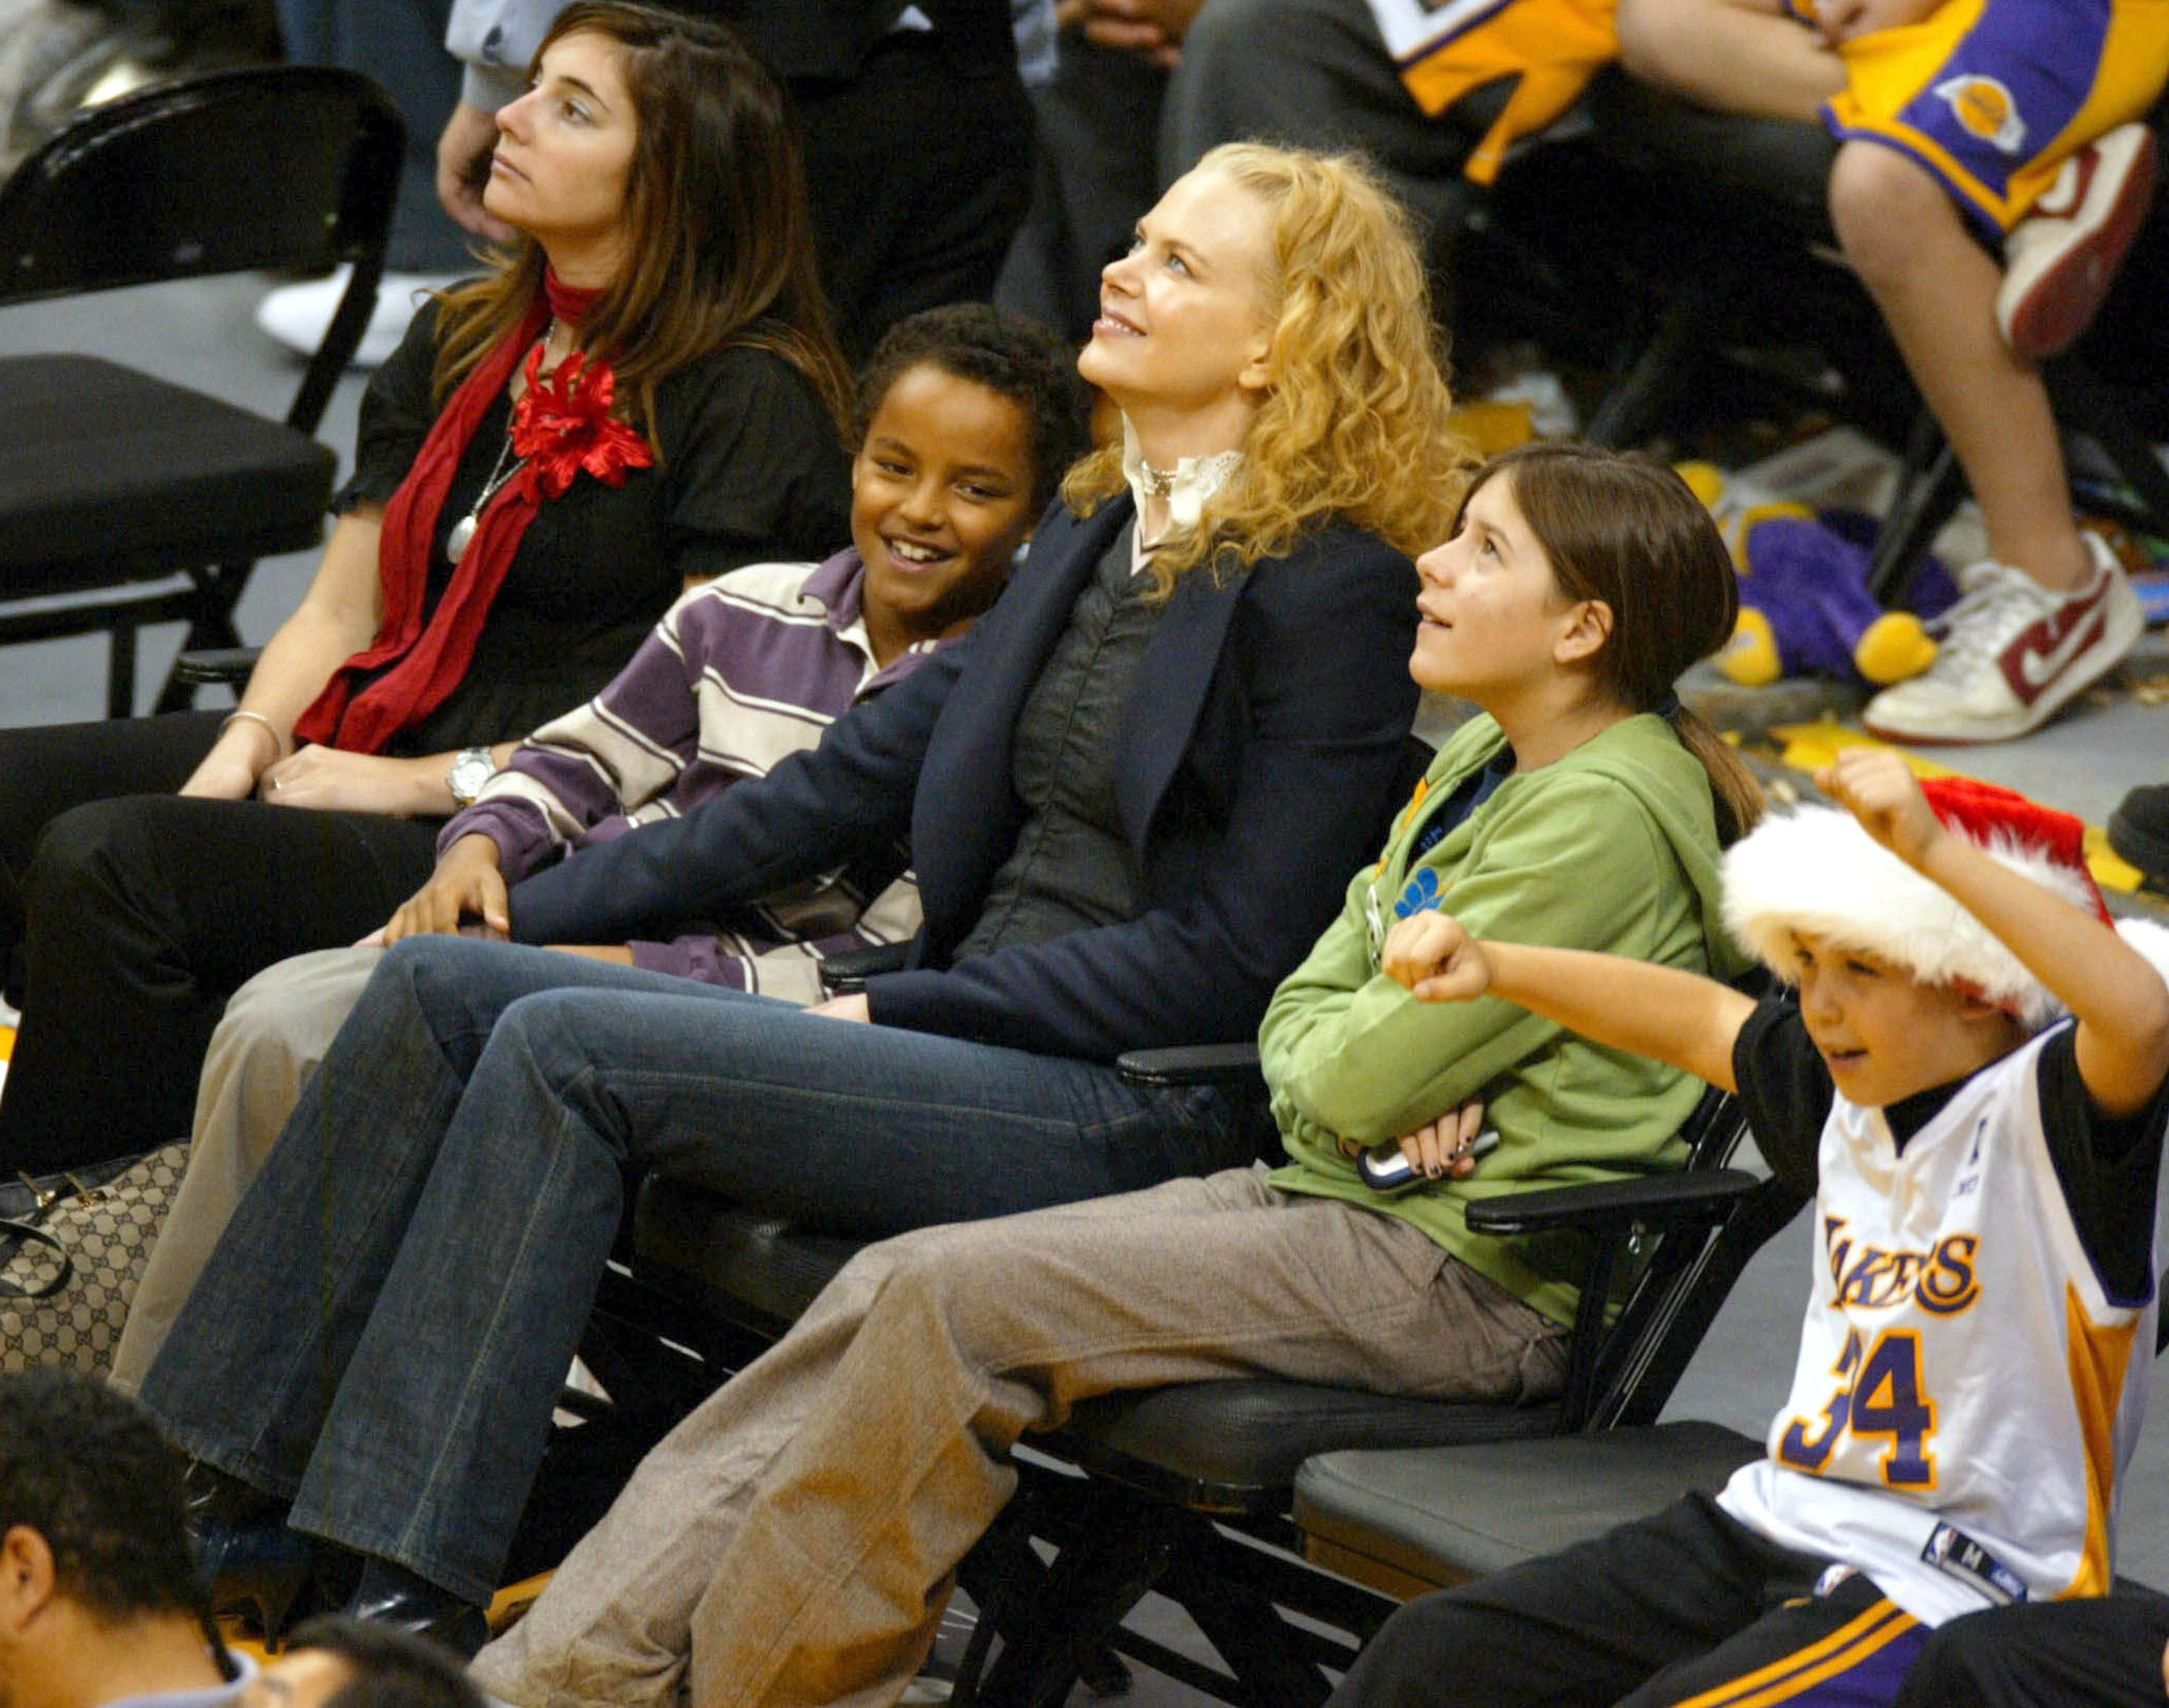 Nicole Kidman with Connor Cruise and Isabella Cruise attend a game between the Los Angeles Lakers and the Miami Heat at the Staples Center December 25, 2004 in Los Angeles, California | Source: Getty Images